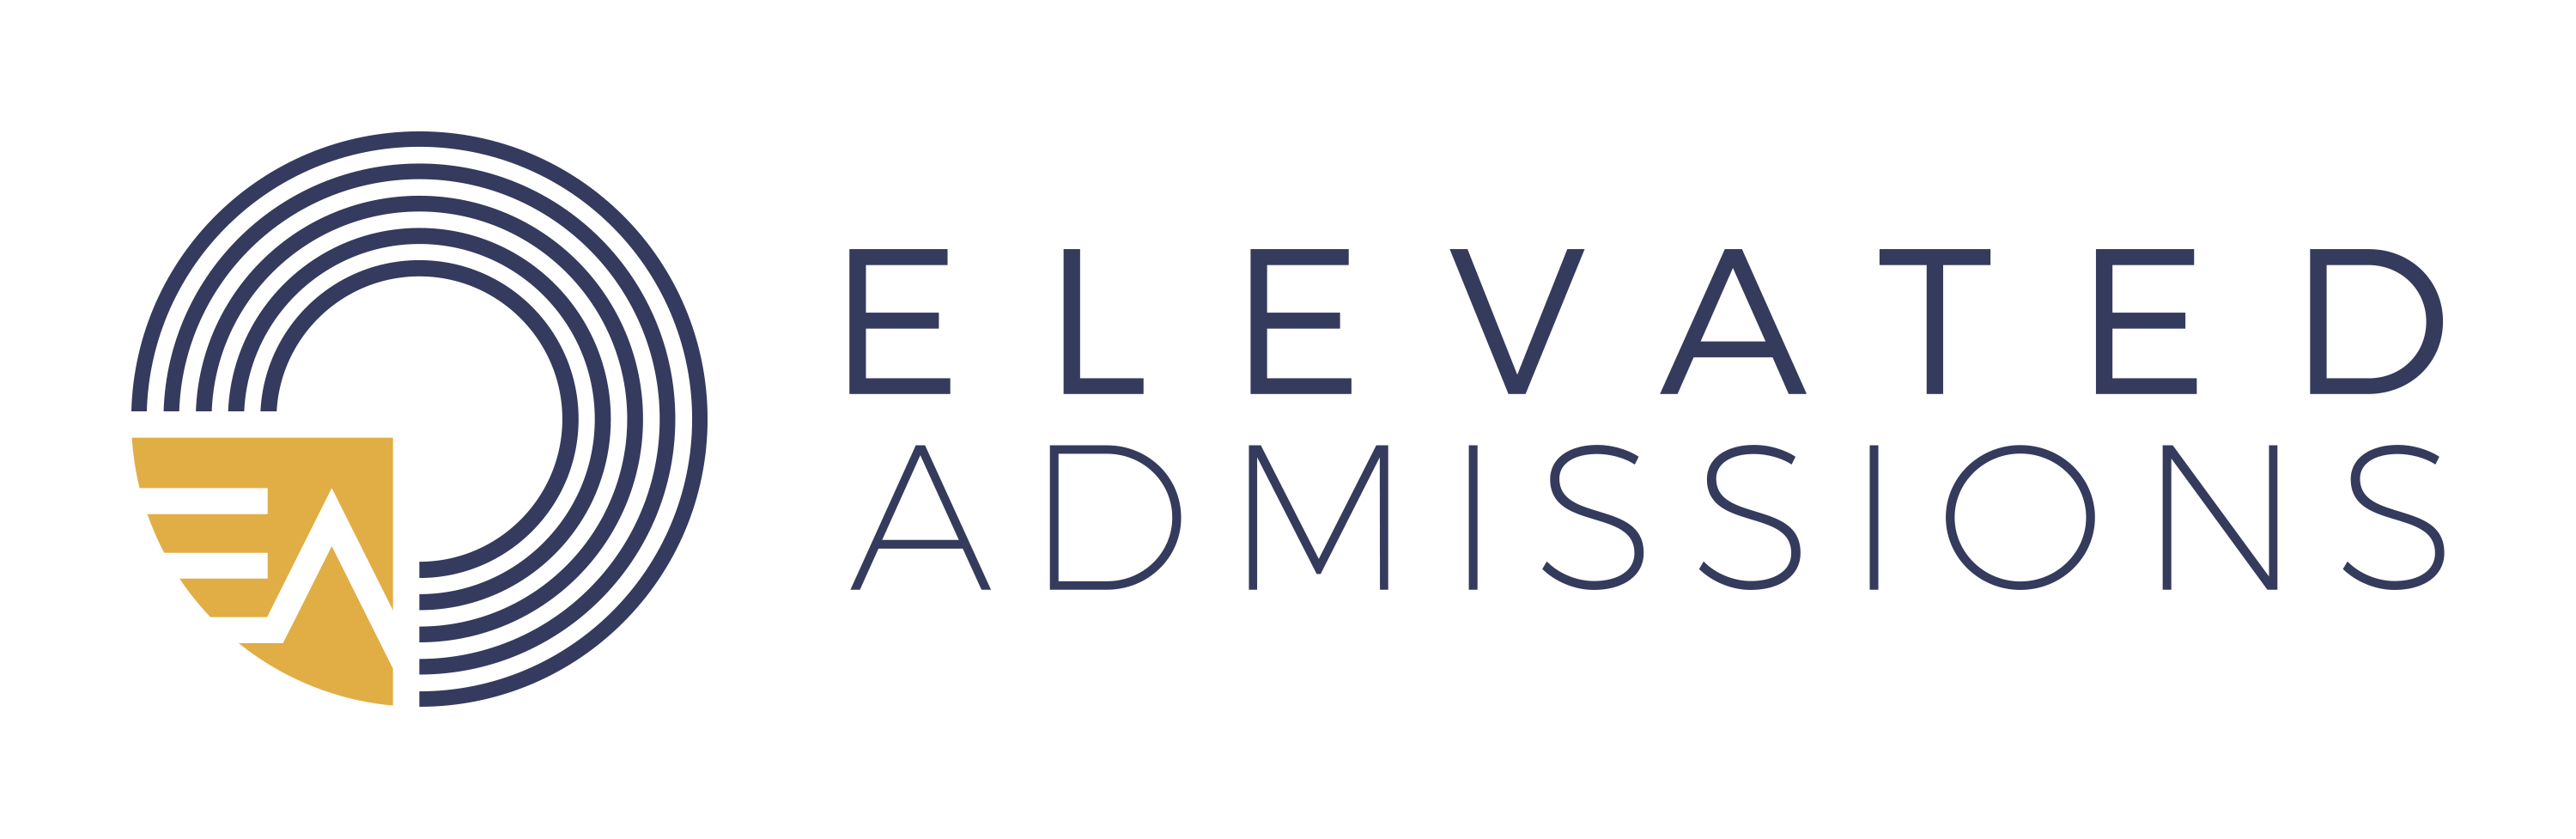 Elevated Admissions logo